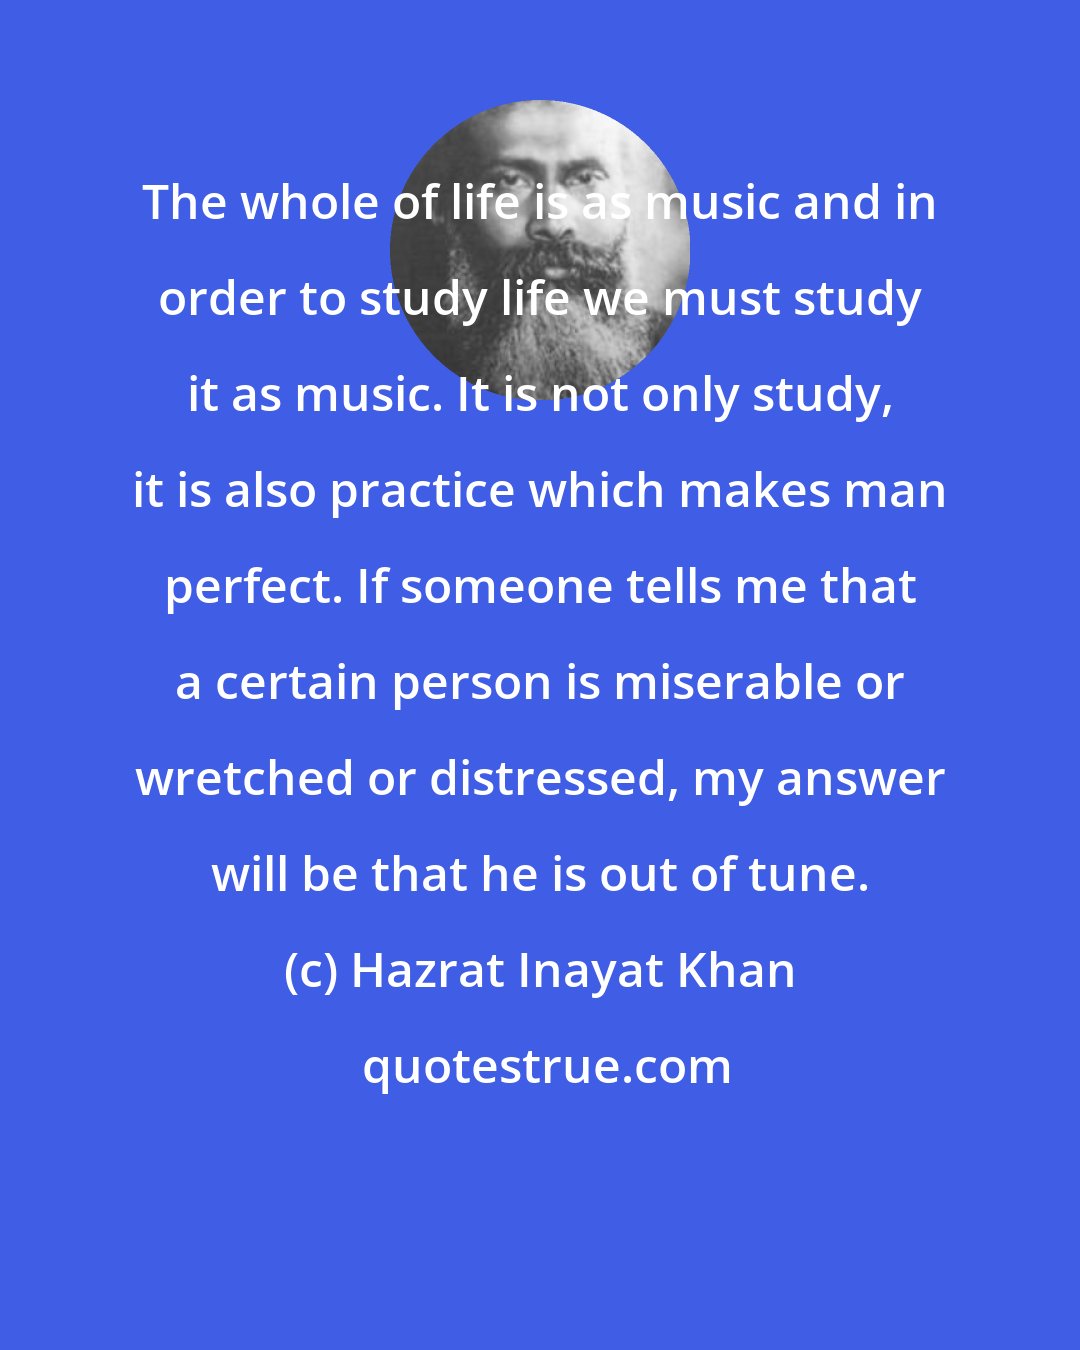 Hazrat Inayat Khan: The whole of life is as music and in order to study life we must study it as music. It is not only study, it is also practice which makes man perfect. If someone tells me that a certain person is miserable or wretched or distressed, my answer will be that he is out of tune.